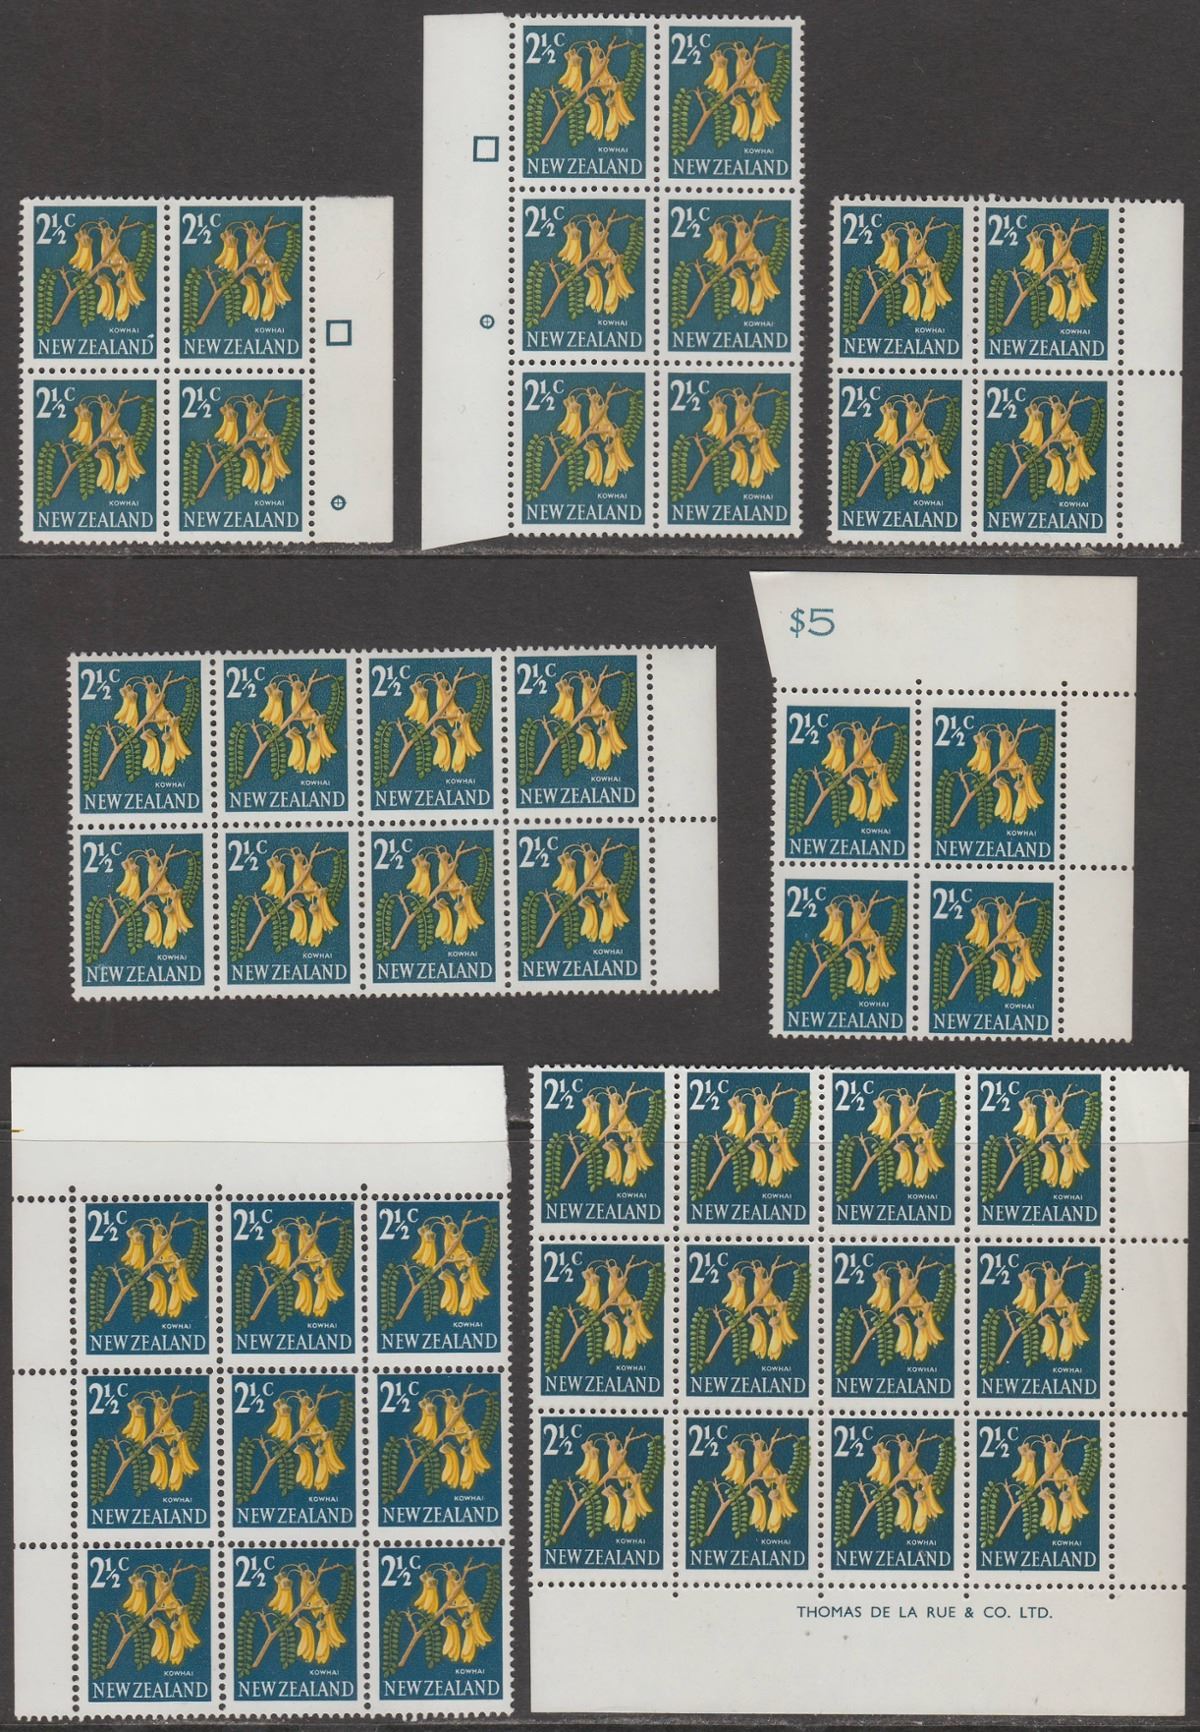 New Zealand 1967 QEII Kowhai 2½c Block Selection with Varieties Mint SG848